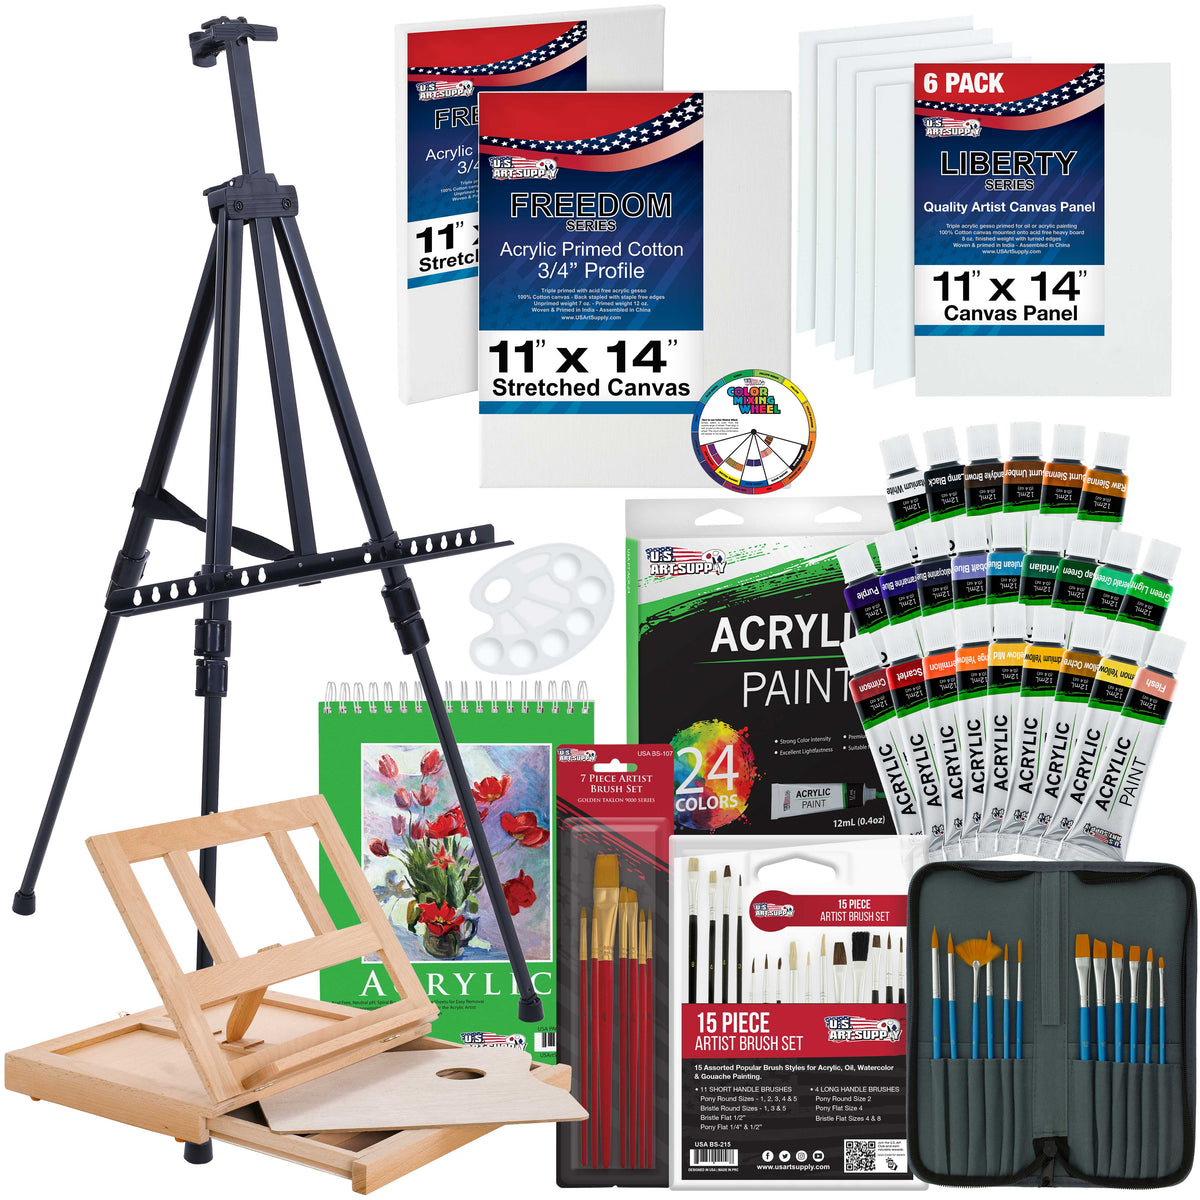 Acrylic Paint Set for Kids Include 24 Pack 0.4 oz Acrylic Paints for Canvas  Painting and 6 Brushes 